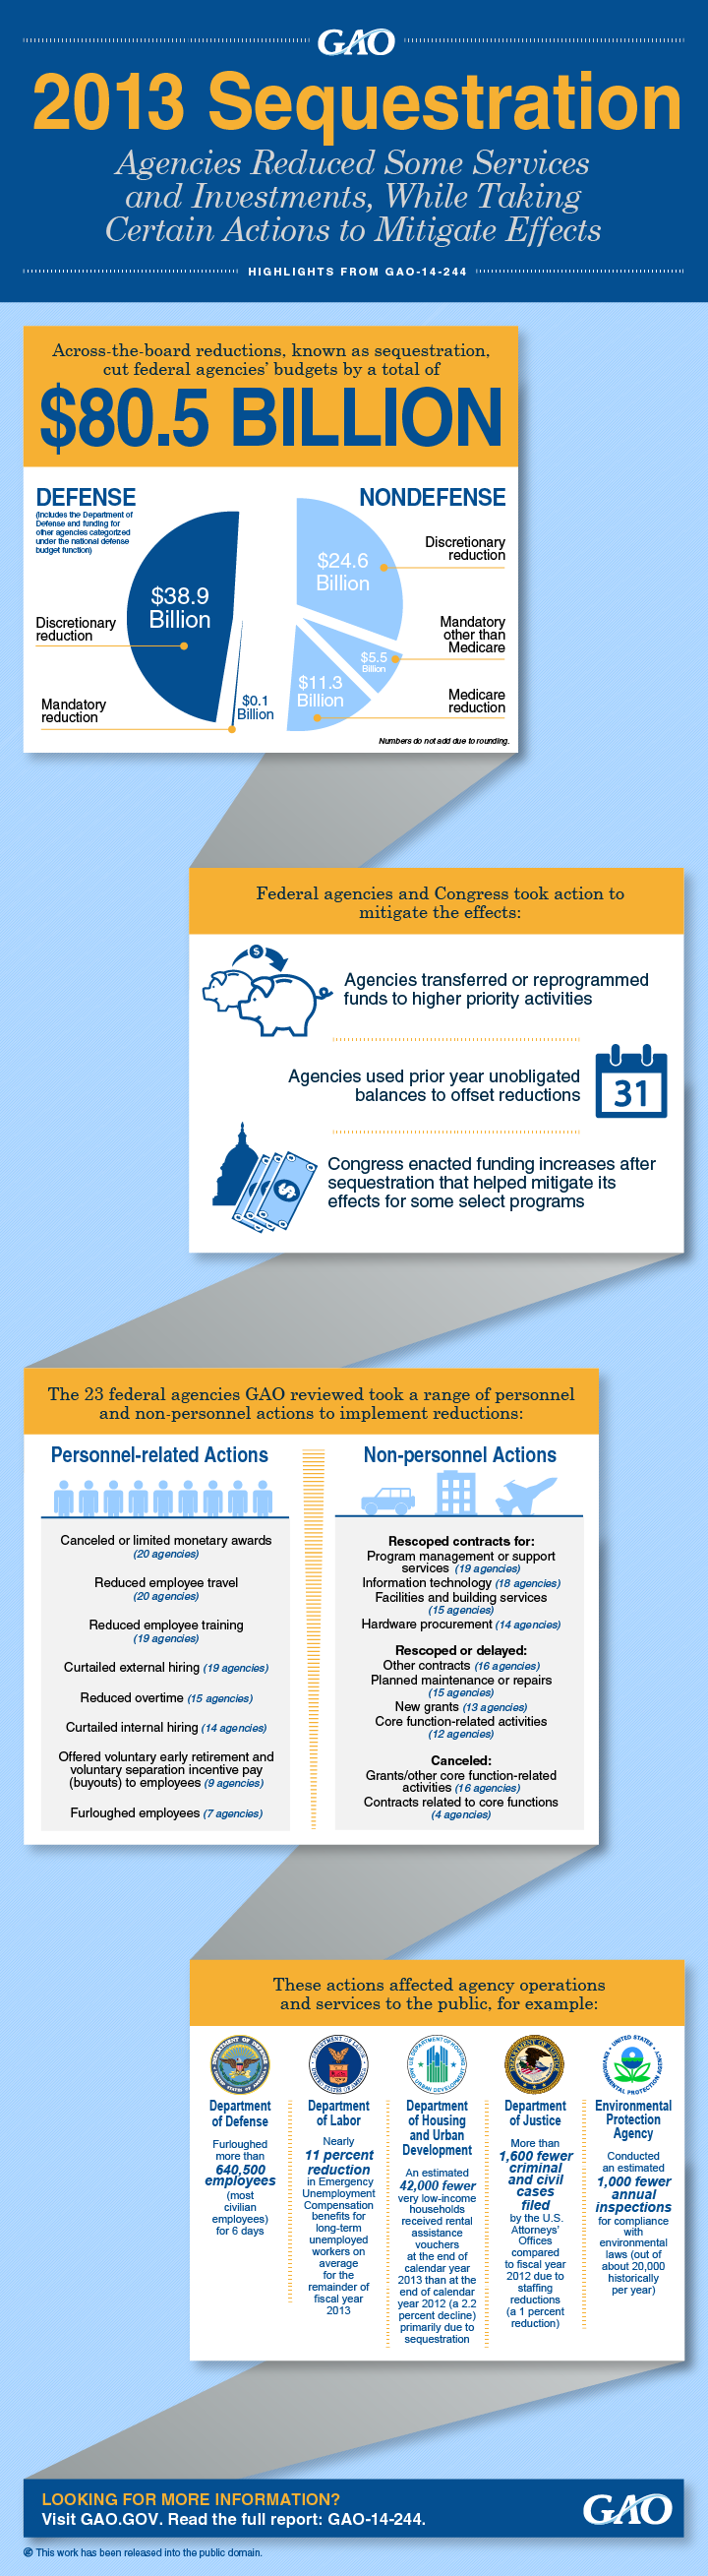 GAO-14-244: Sequestration Infographic